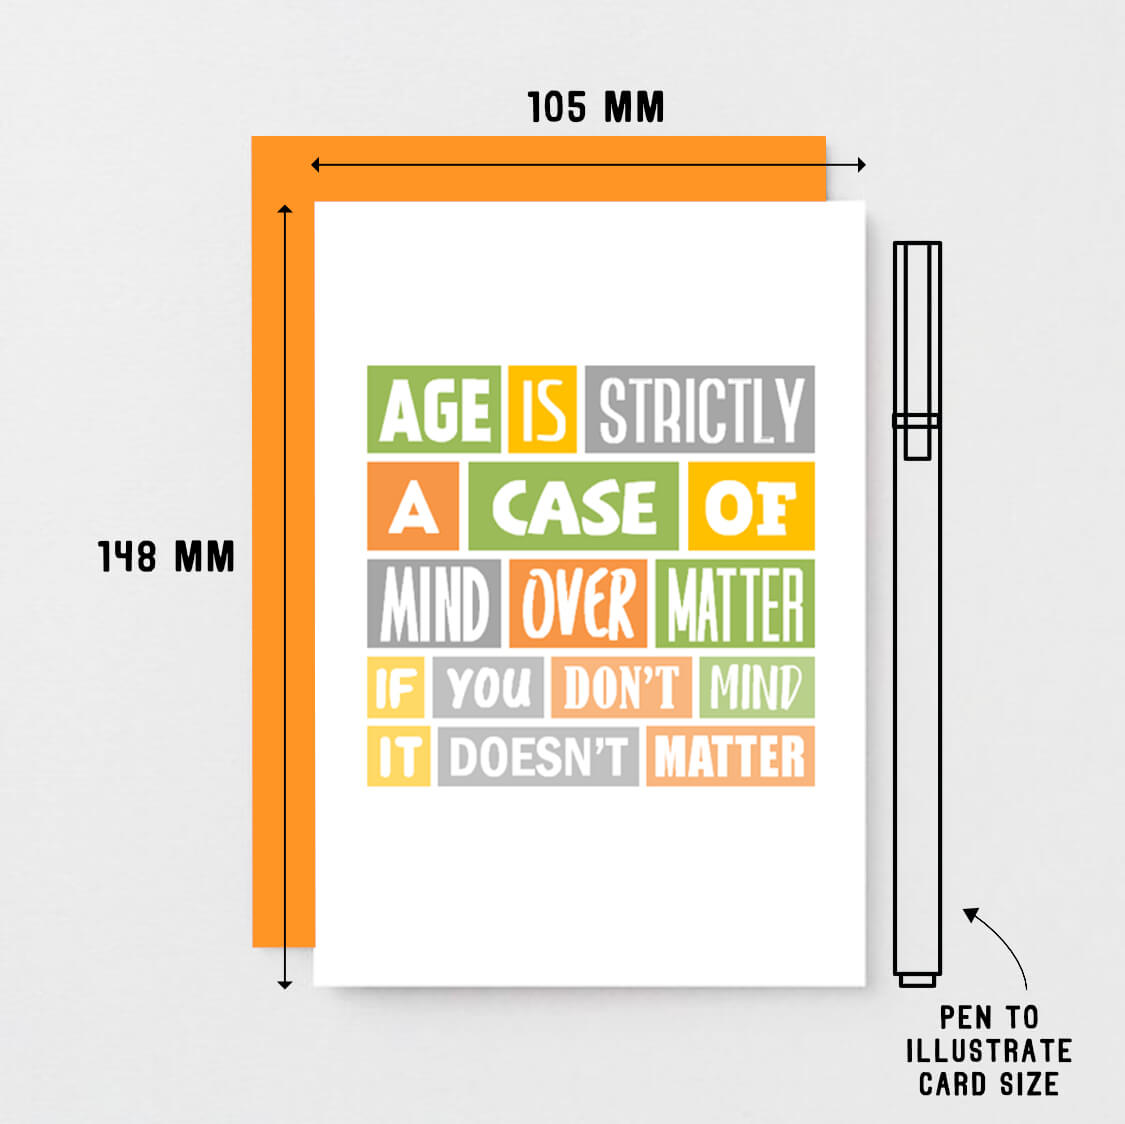 Birthday Card by SixElevenCreations. Reads Age is strictly a case of mind over matter. If you don't mind it doesn't matter. Product Code SE0038A6